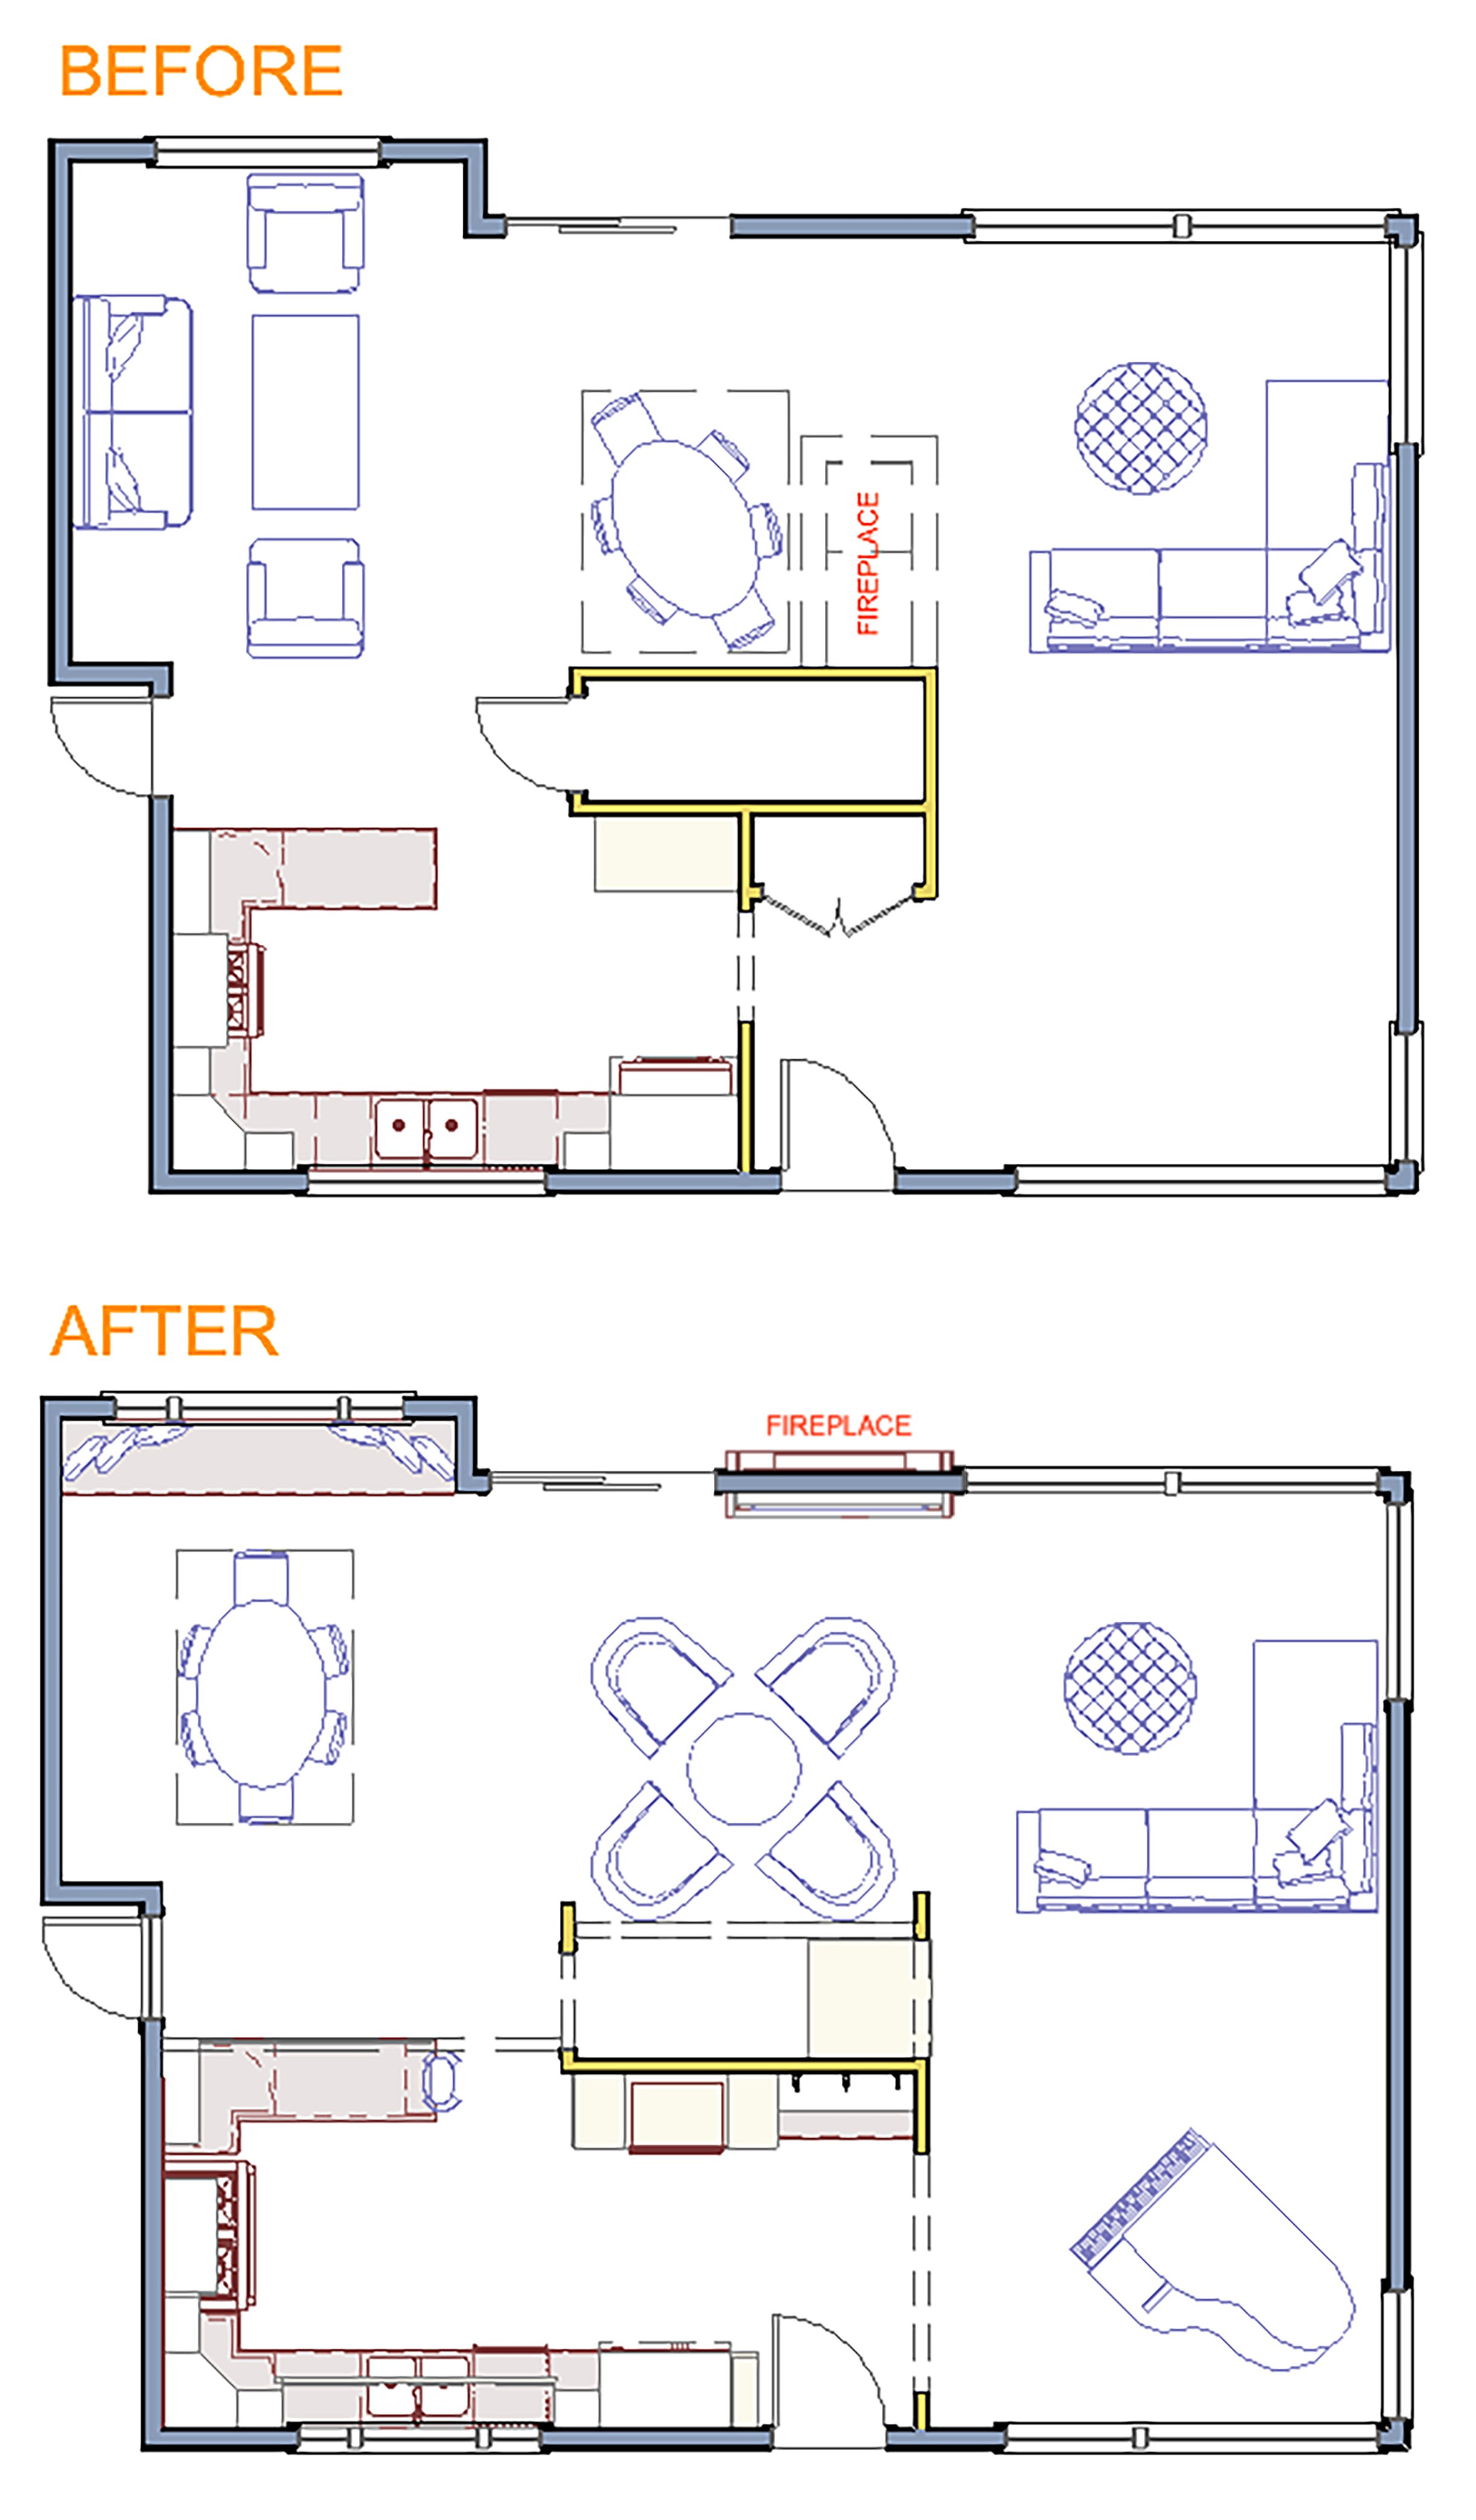 Olson_Layout Before & After.jpg